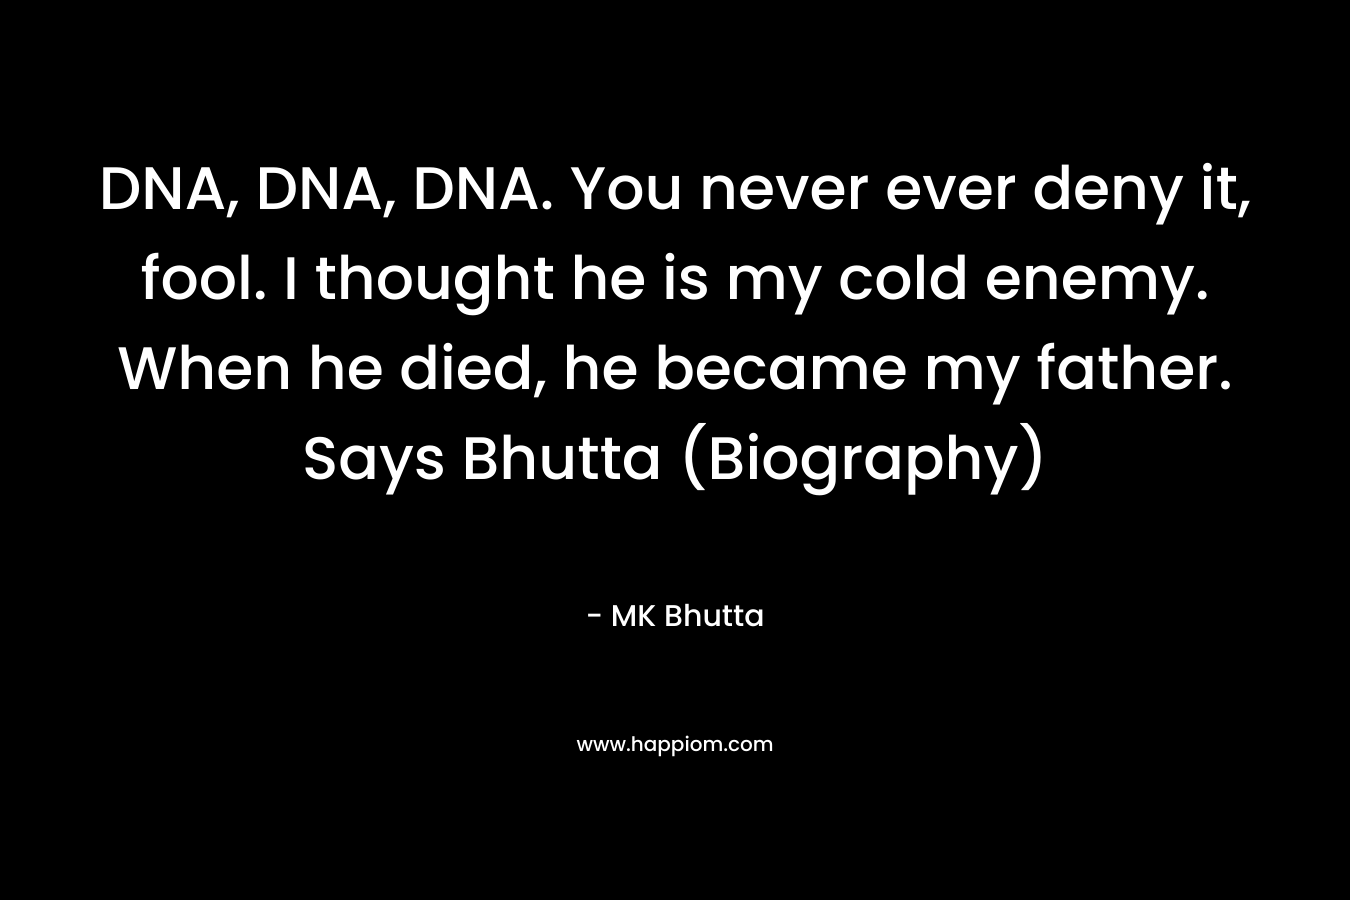 DNA, DNA, DNA. You never ever deny it, fool. I thought he is my cold enemy. When he died, he became my father. Says Bhutta (Biography)